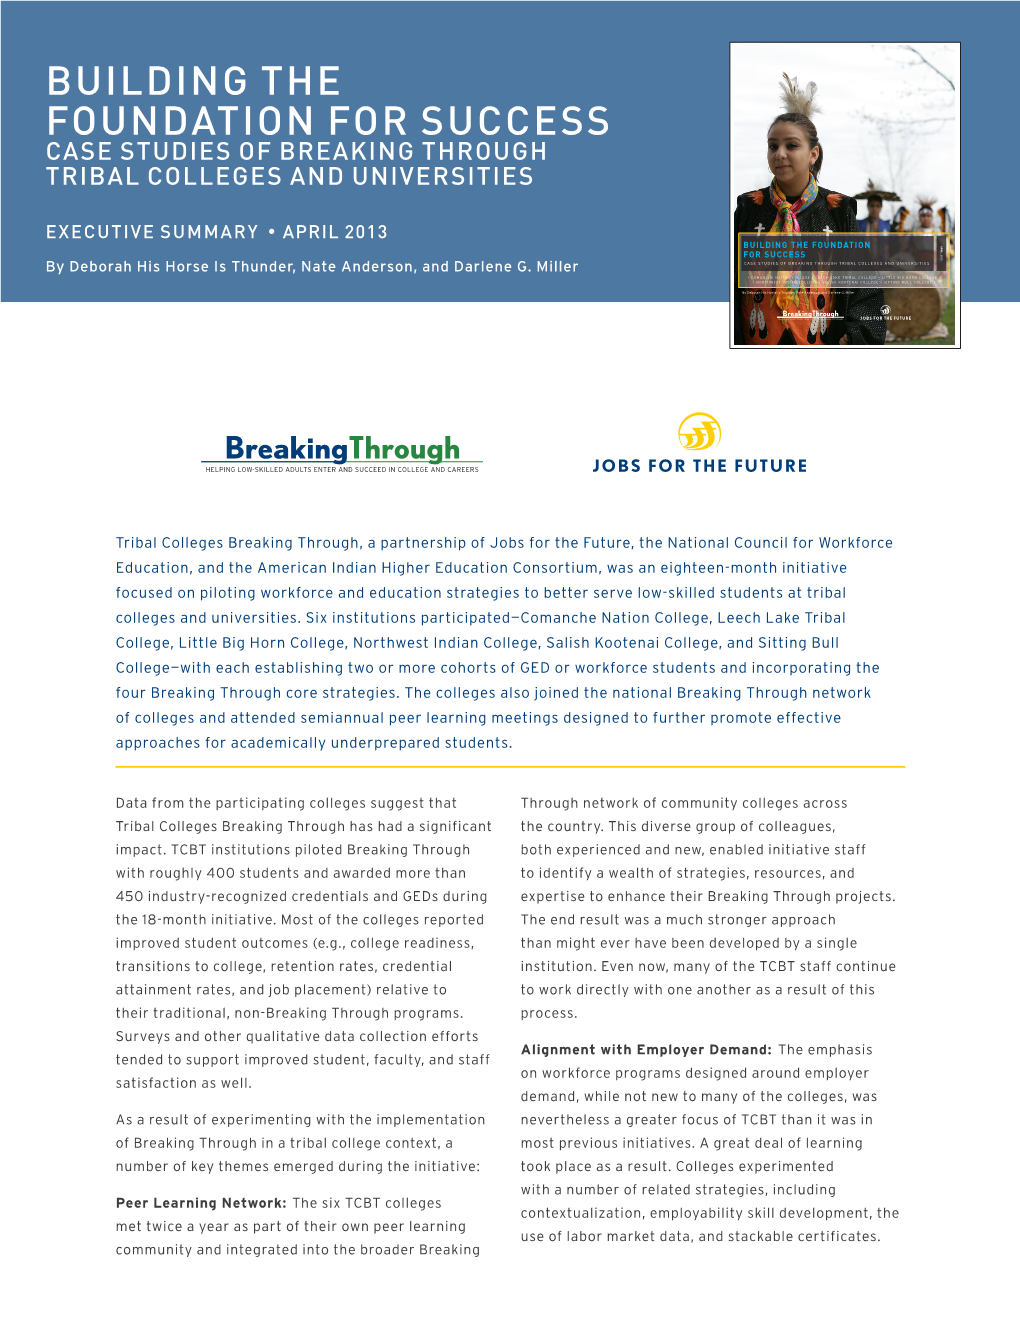 Building the Foundation for Success Case Studies of Breaking Through Tribal Colleges and Universities